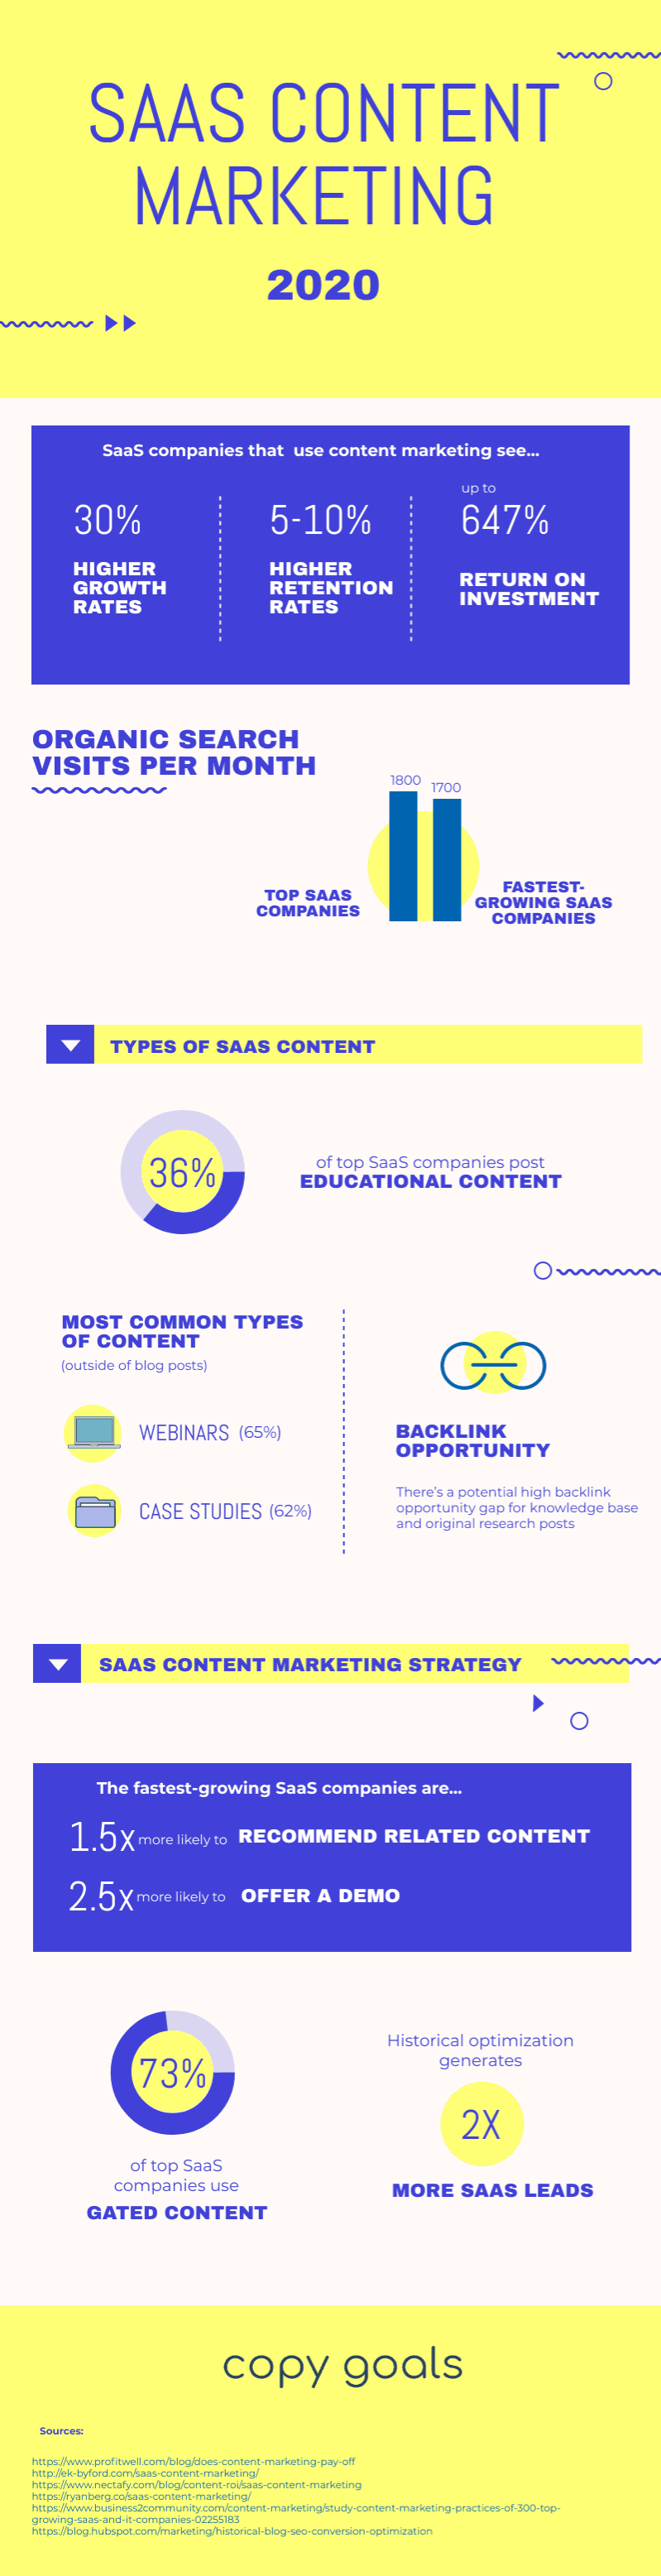 SaaS content marketing infographic